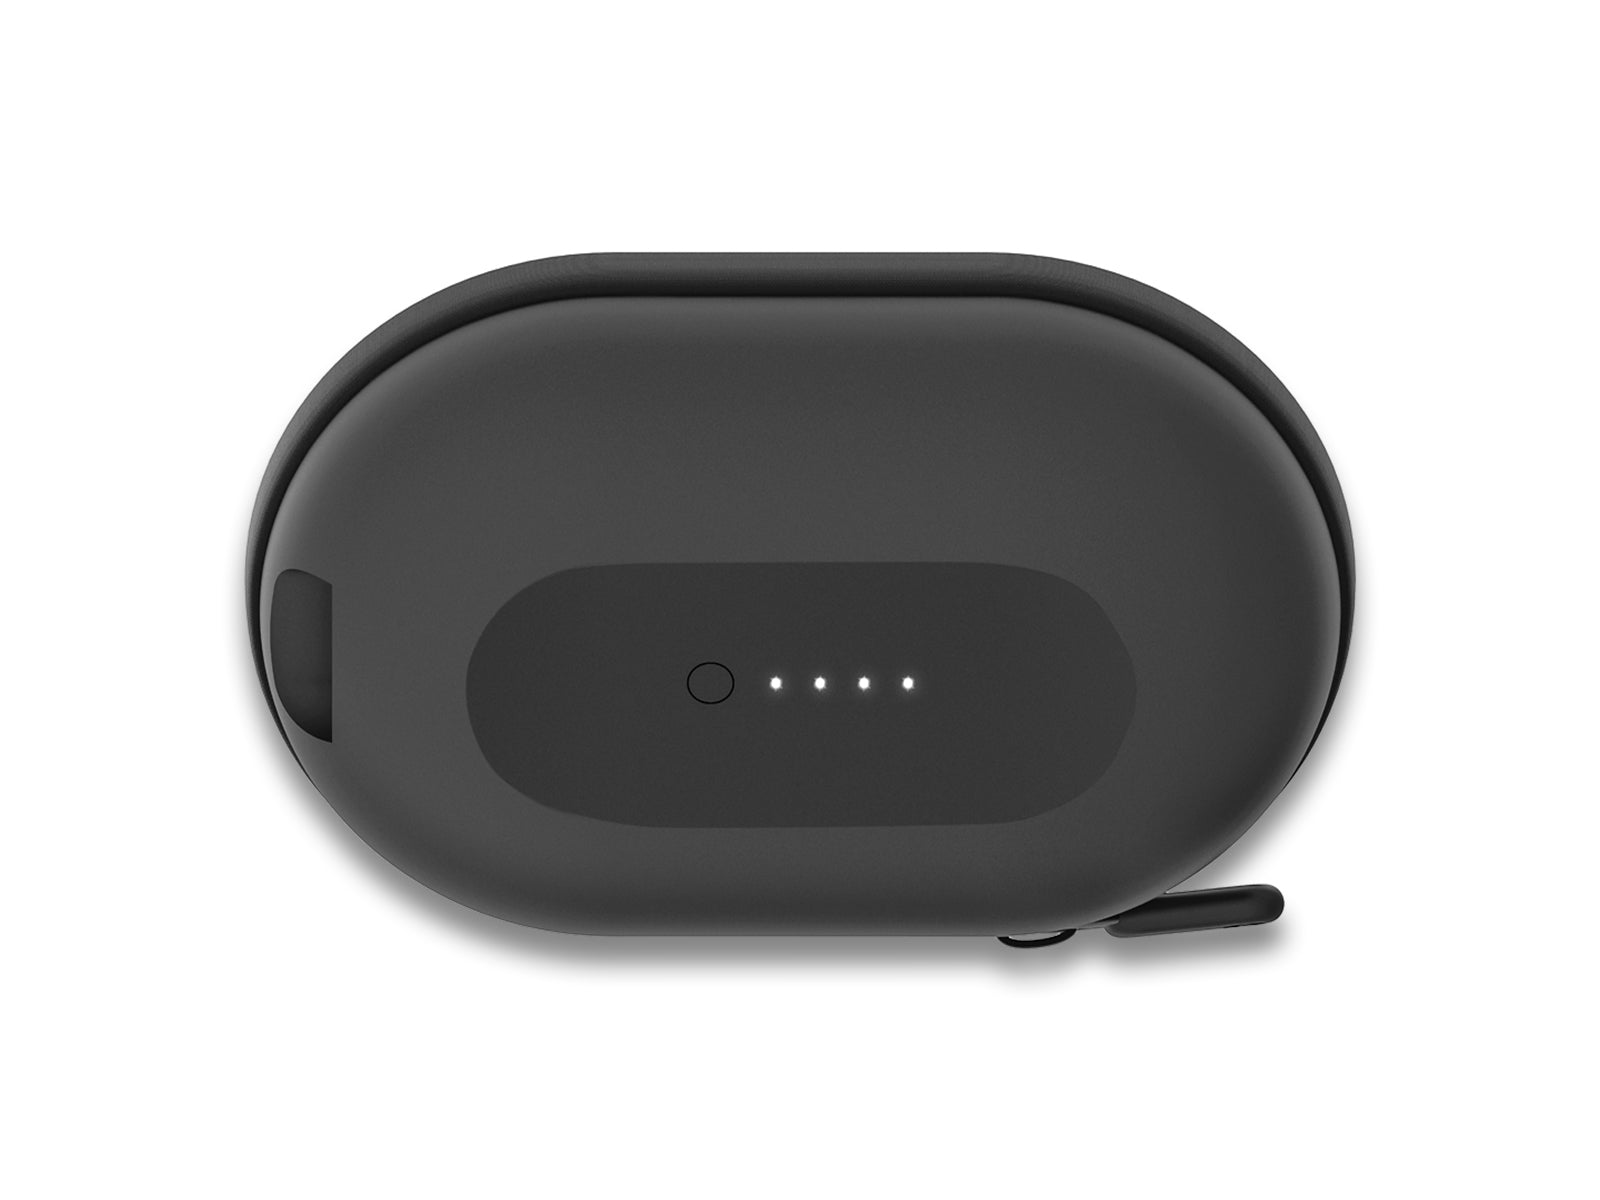 Mophie Portable Power Capsule Charger Front View